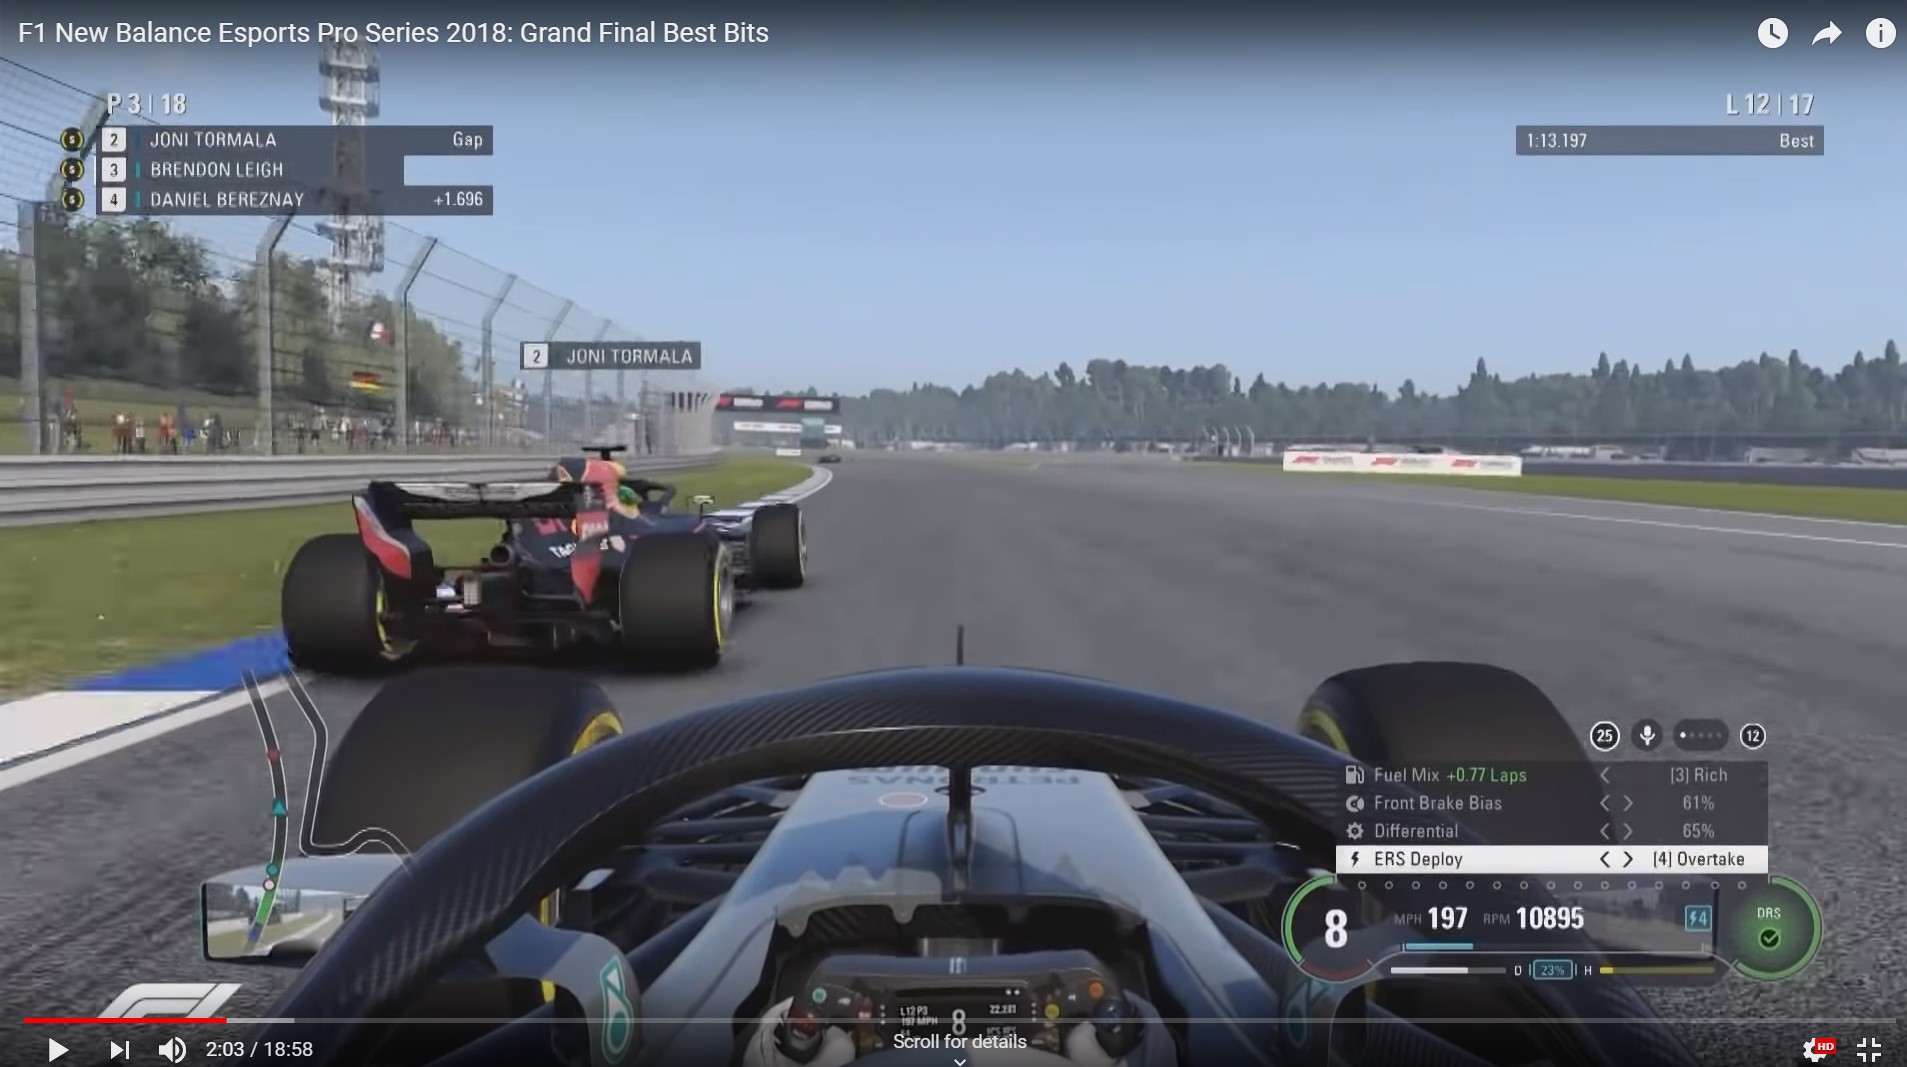 Gaming is big in motorsports and puts the fans in the driver's seat